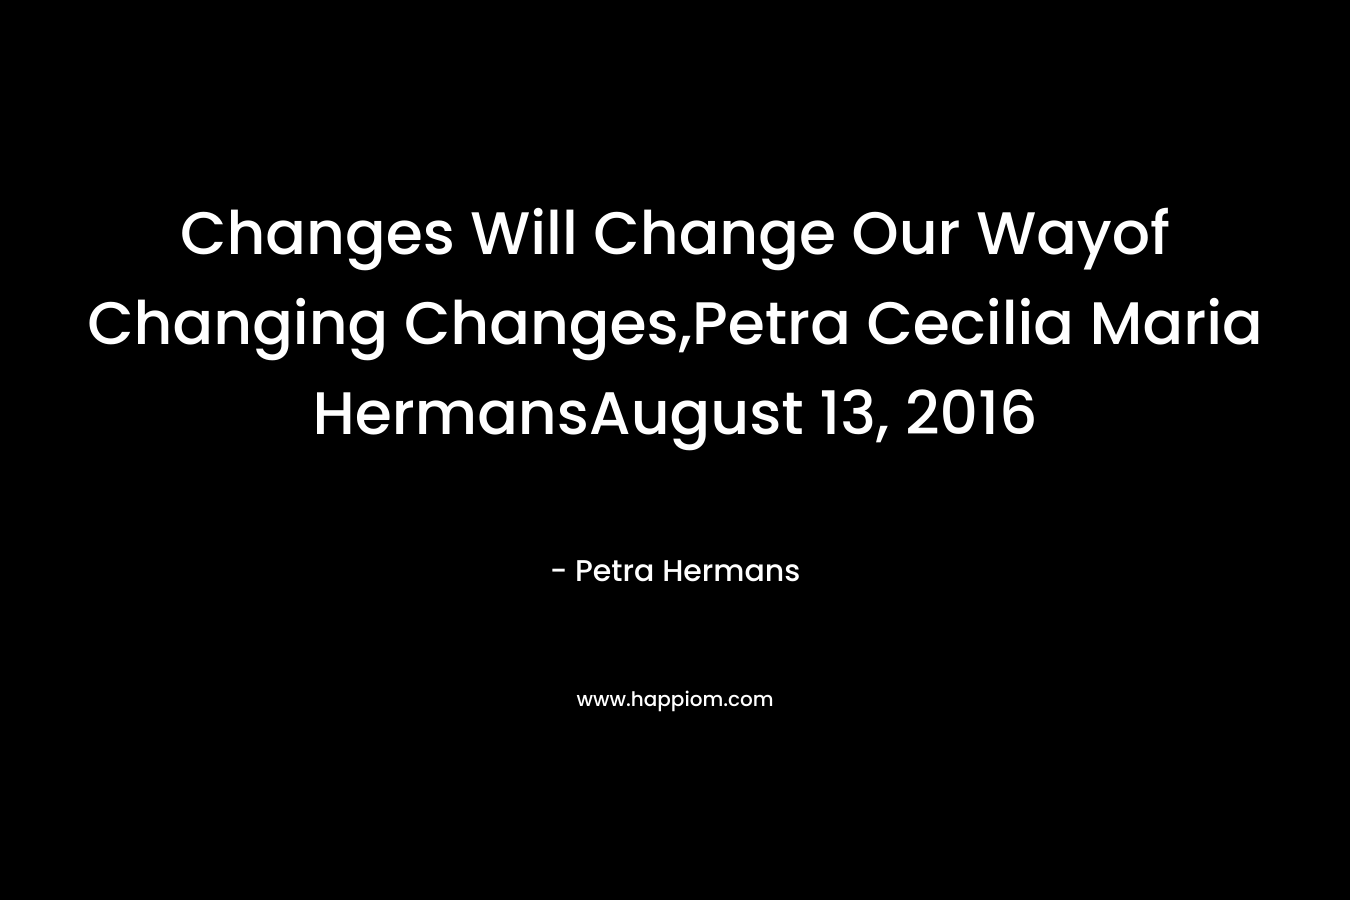 Changes Will Change Our Wayof Changing Changes,Petra Cecilia Maria HermansAugust 13, 2016